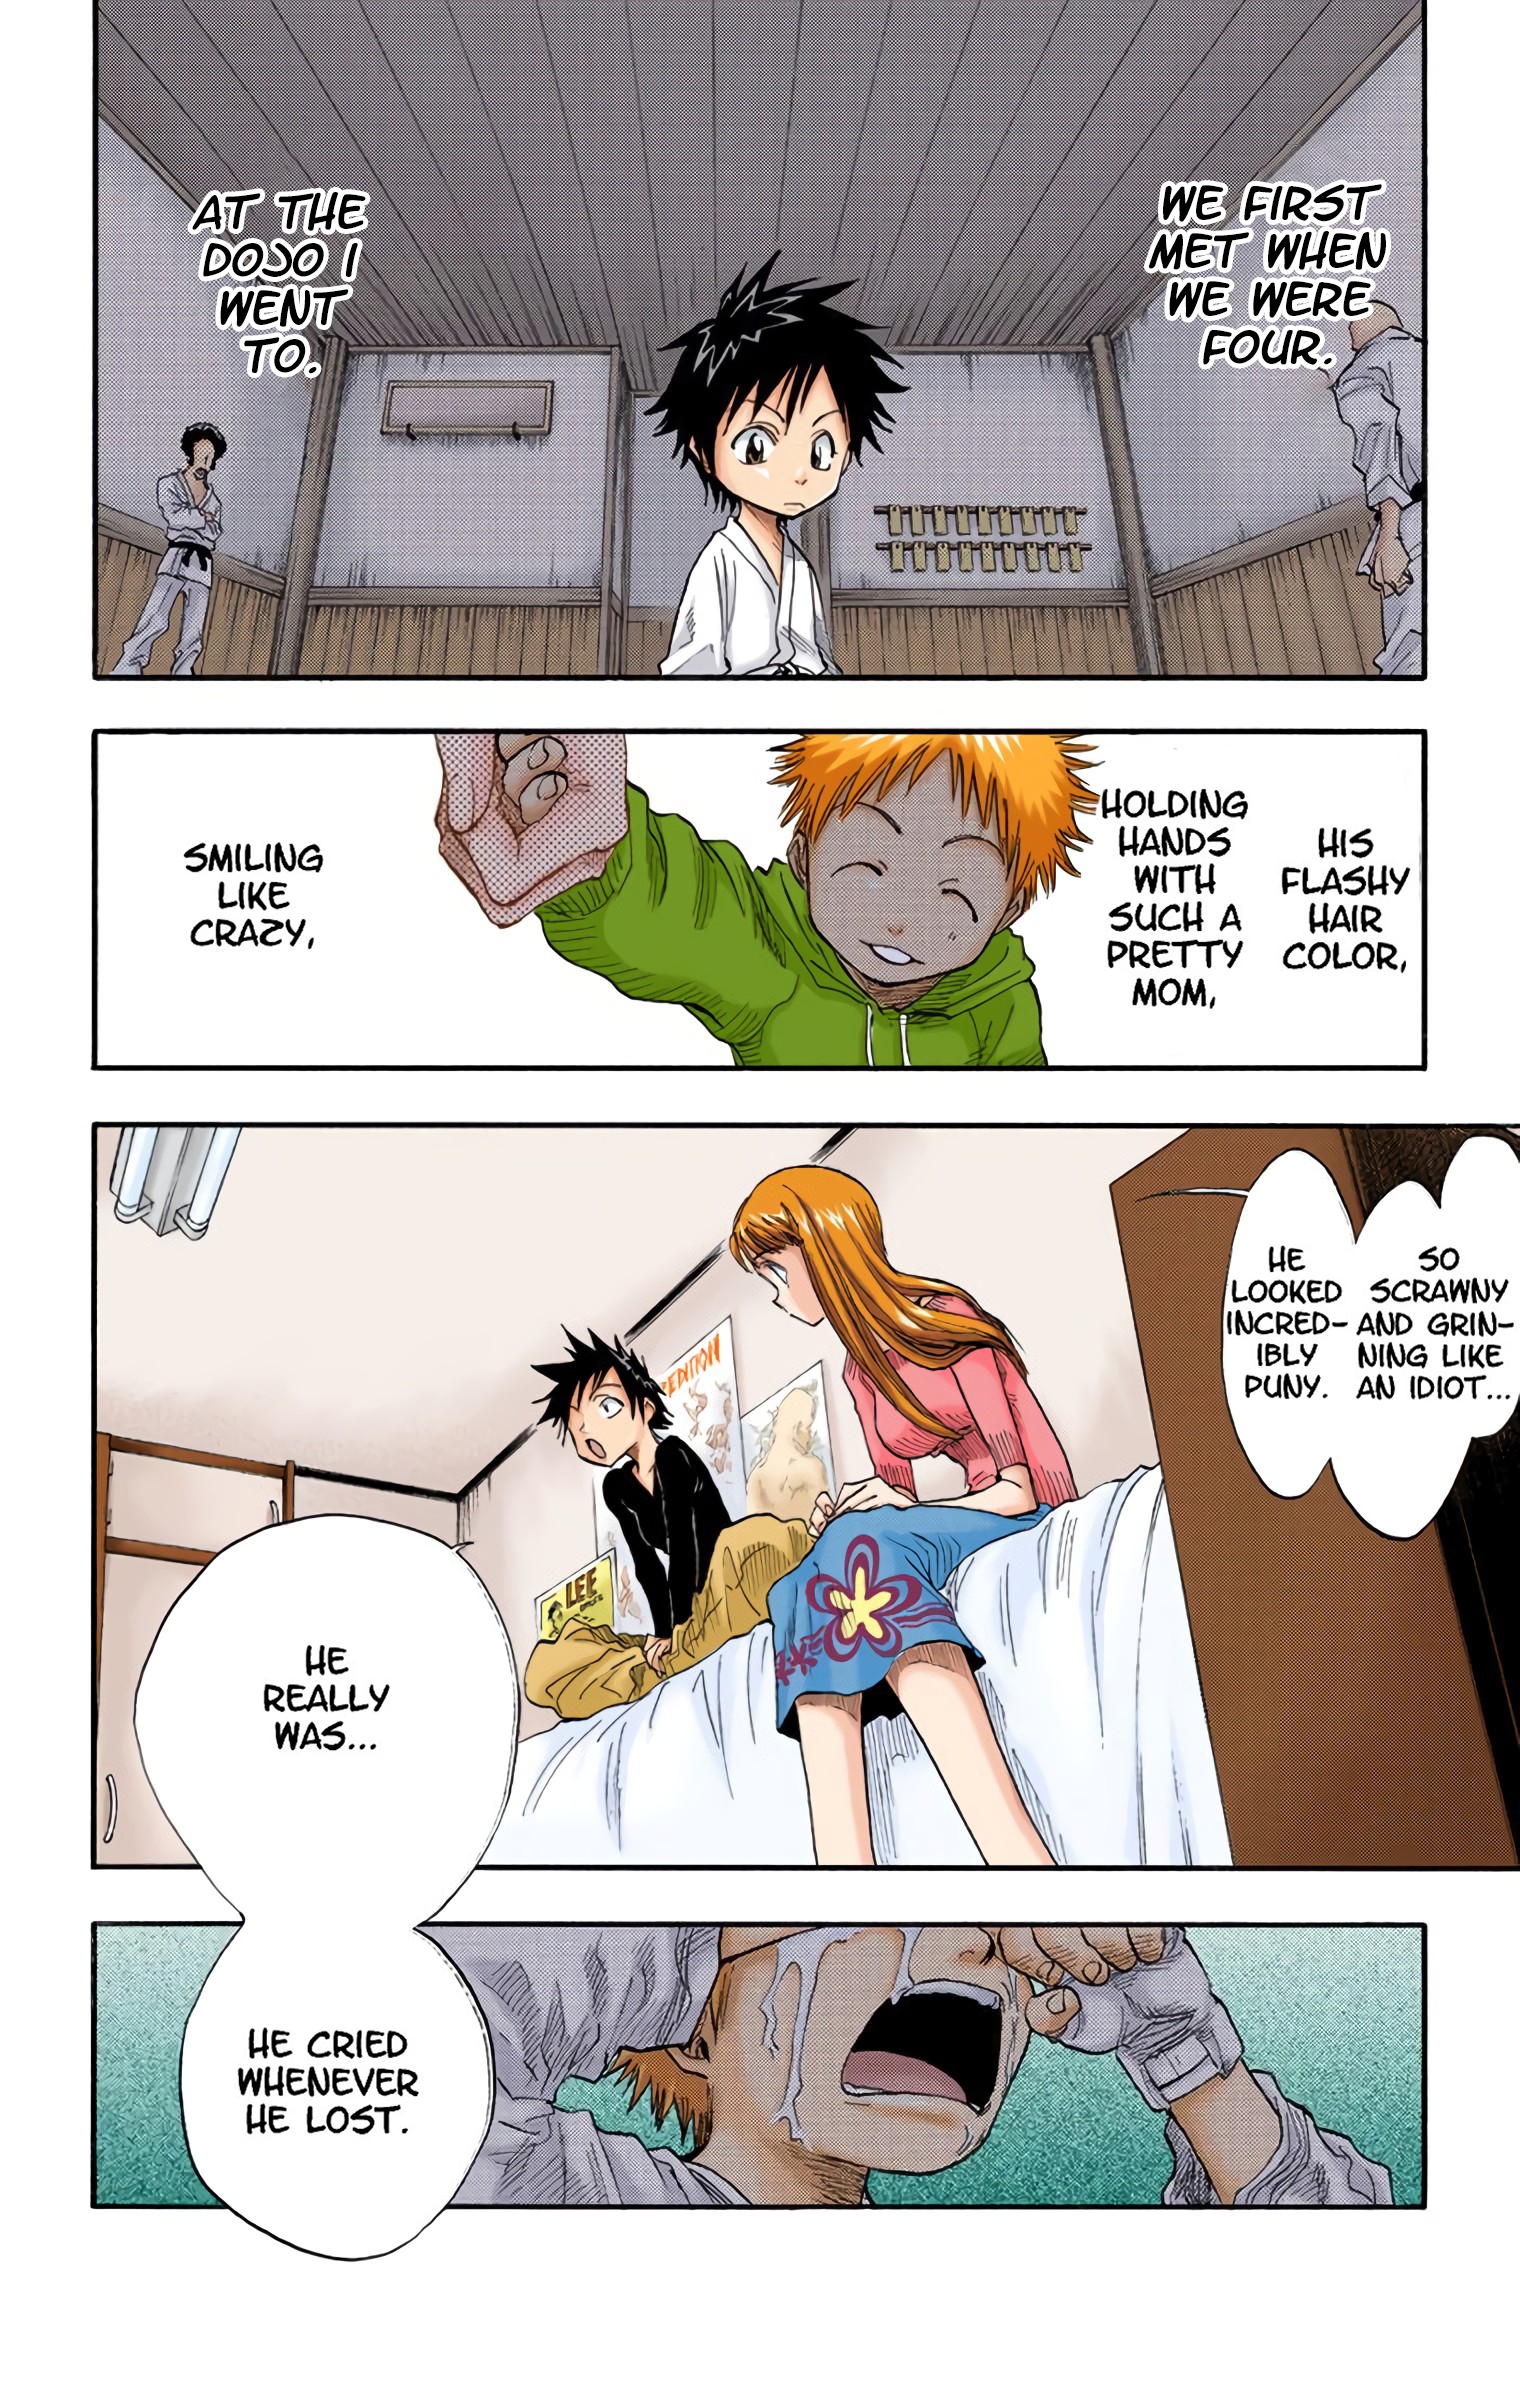 Bleach - Digital Colored Comics Vol.3 Chapter 18: 6/17 Op. 2 Doesn't Smile Much Anymore - Picture 3